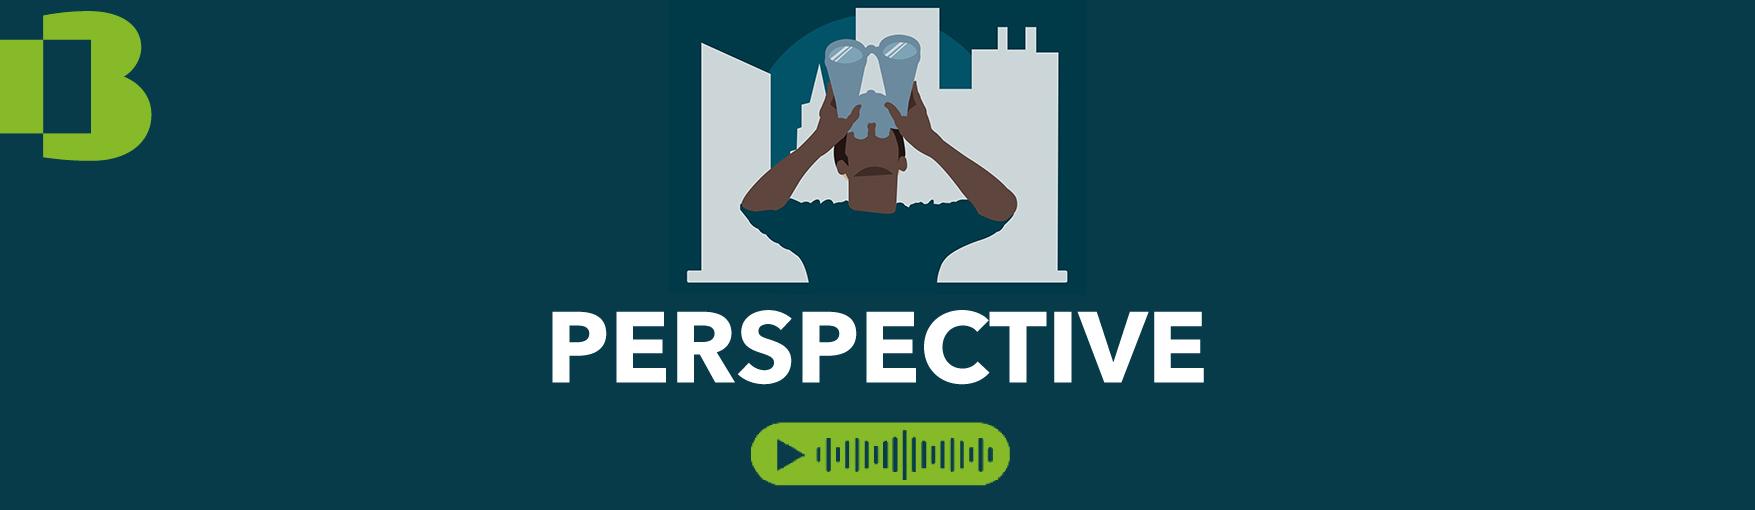 Header podcast perspective 5